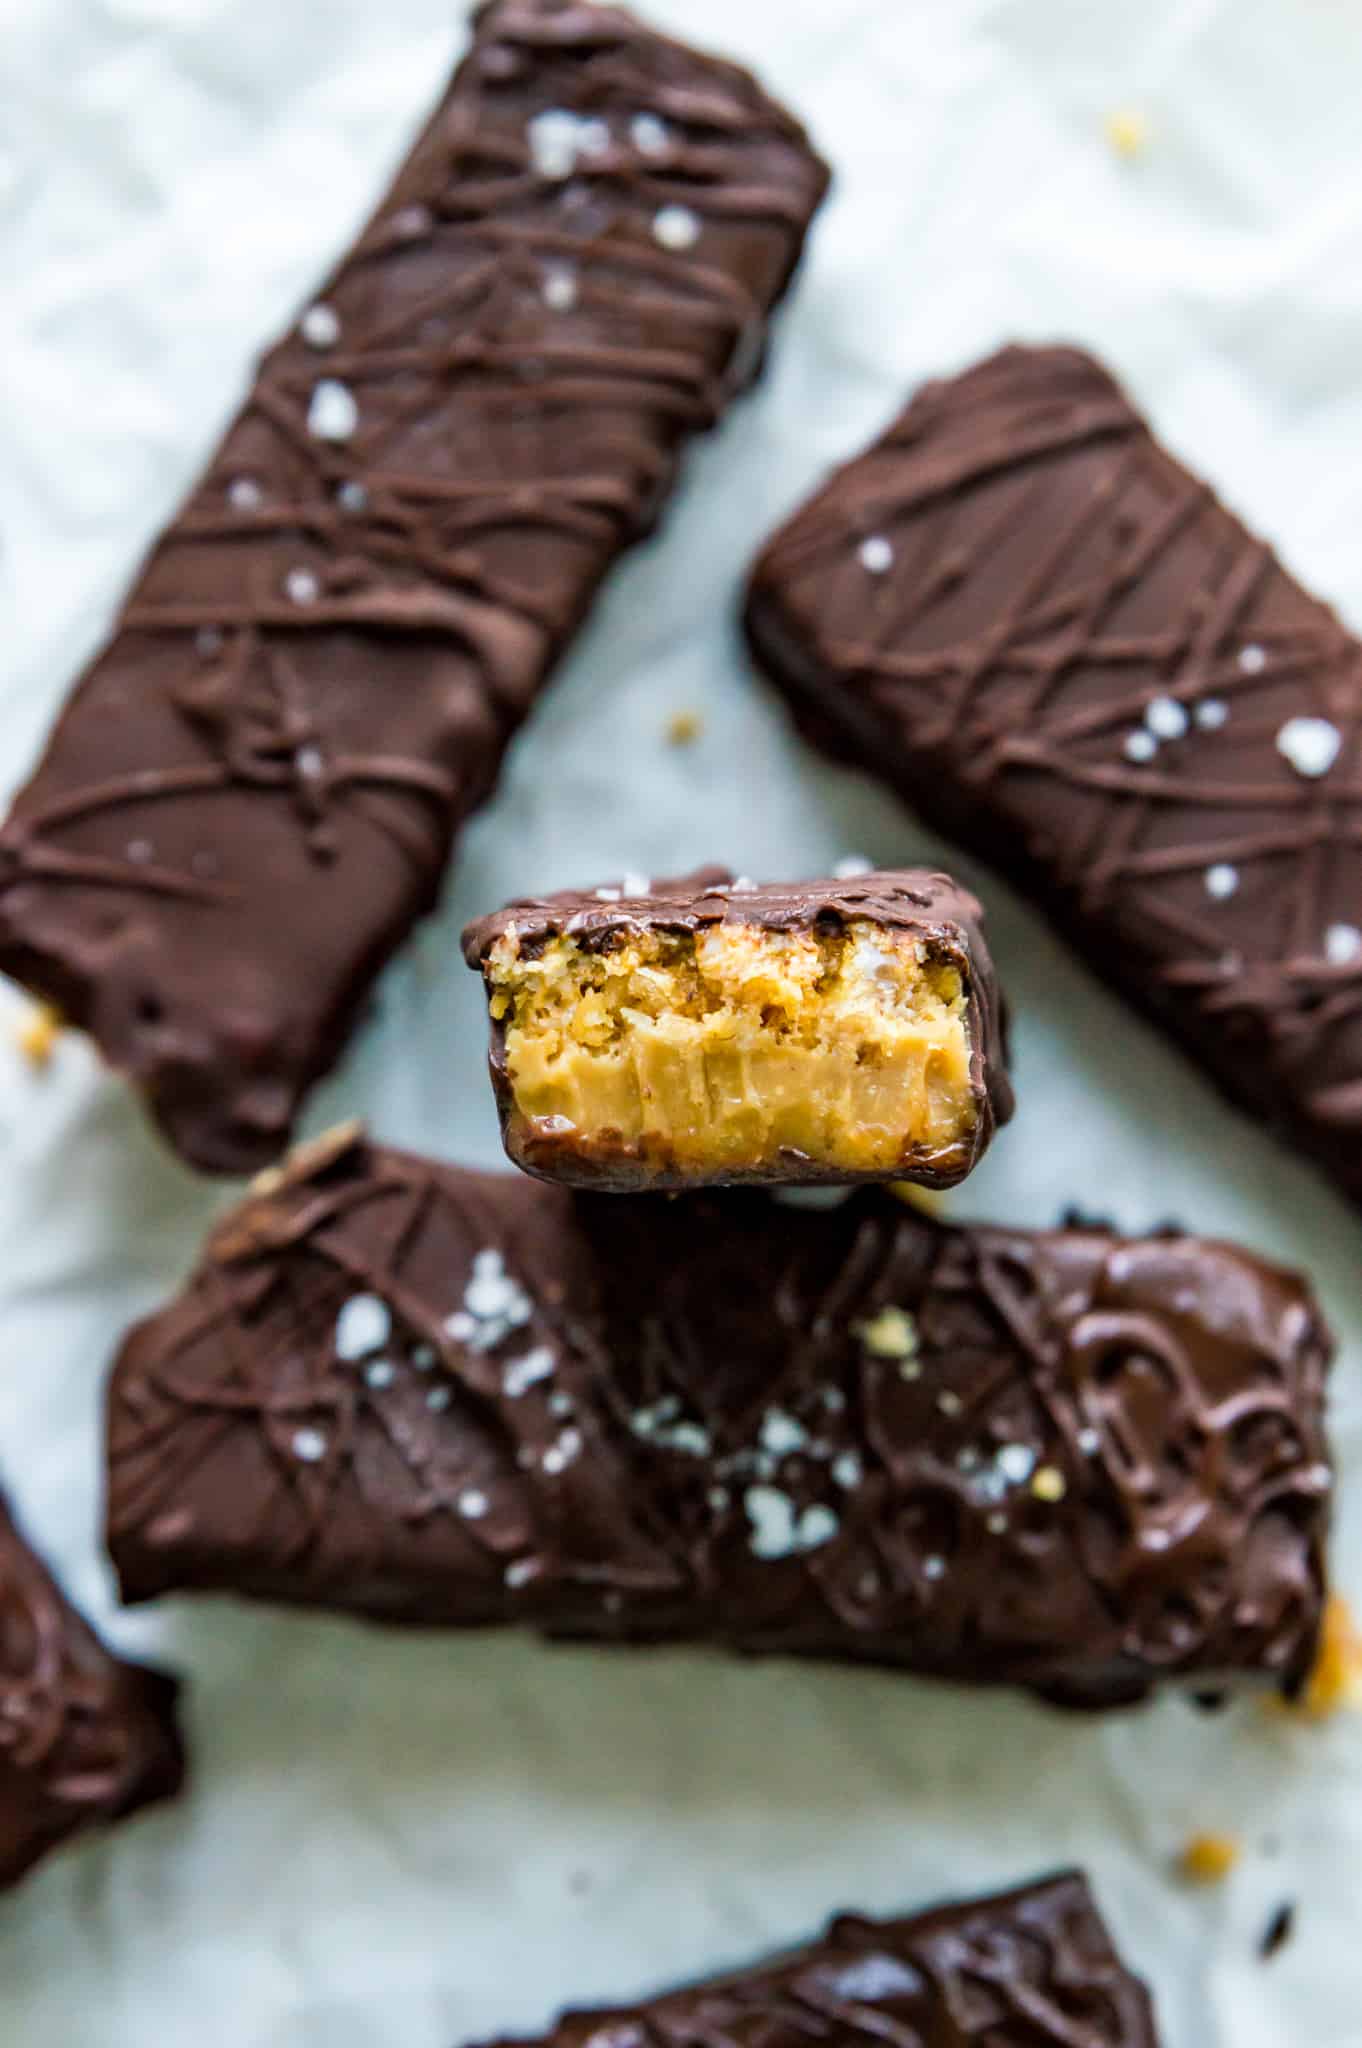 A homemade cereal bar with chocolate drizzled on it and a bite taken out of it.